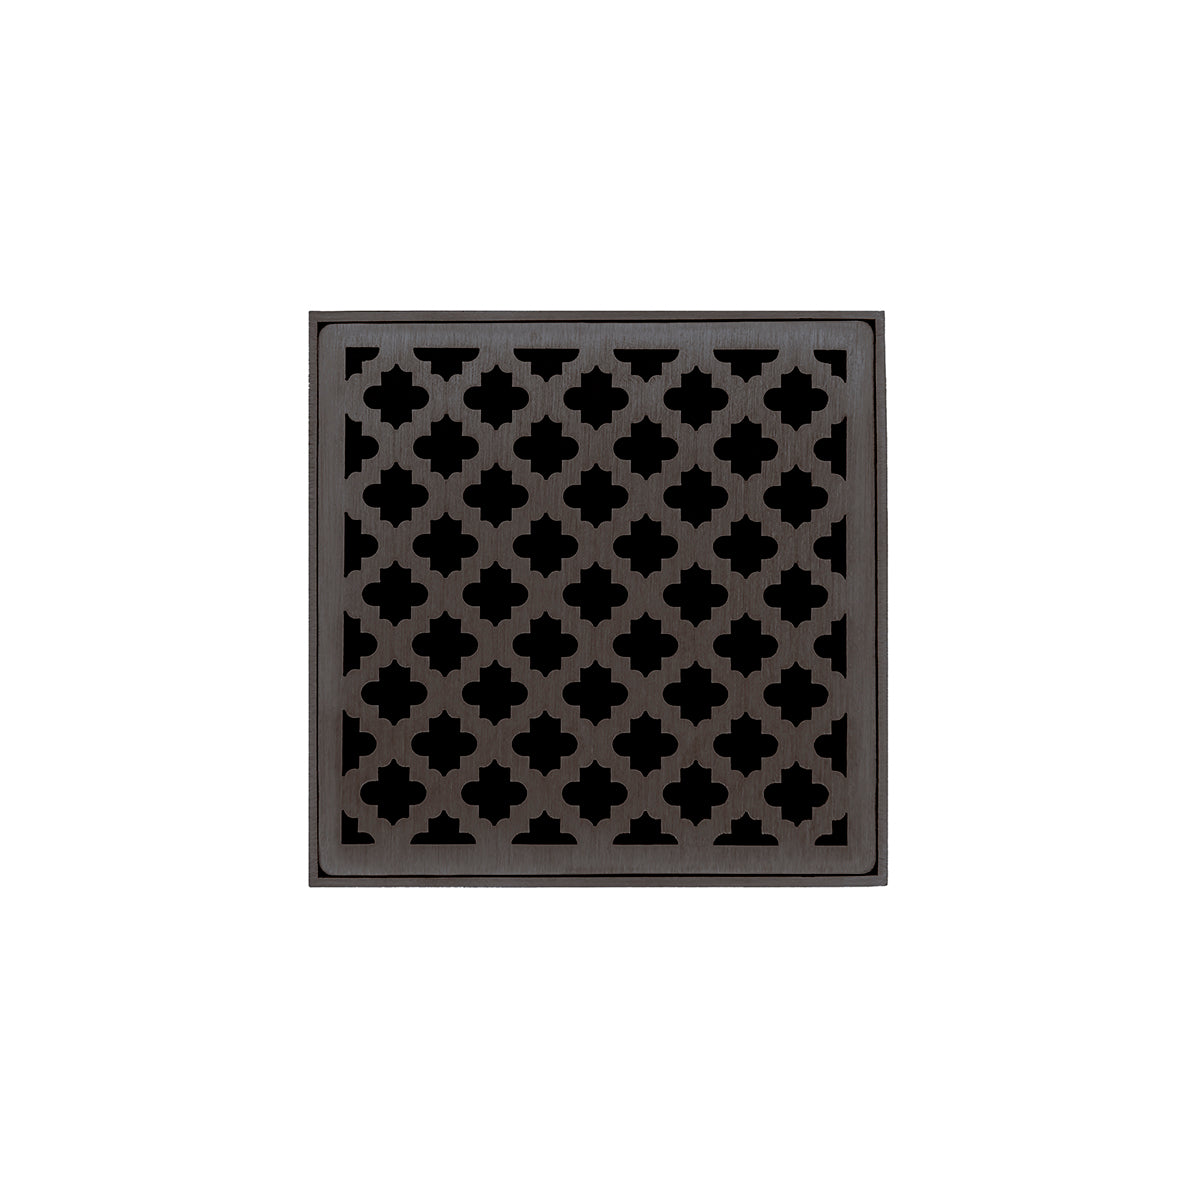 Infinity Drain 5" x 5" MD 5 Premium Center Drain Kit with Moor Pattern Decorative Plate with Cast Iron Drain Body for Hot Mop, 2" Outlet